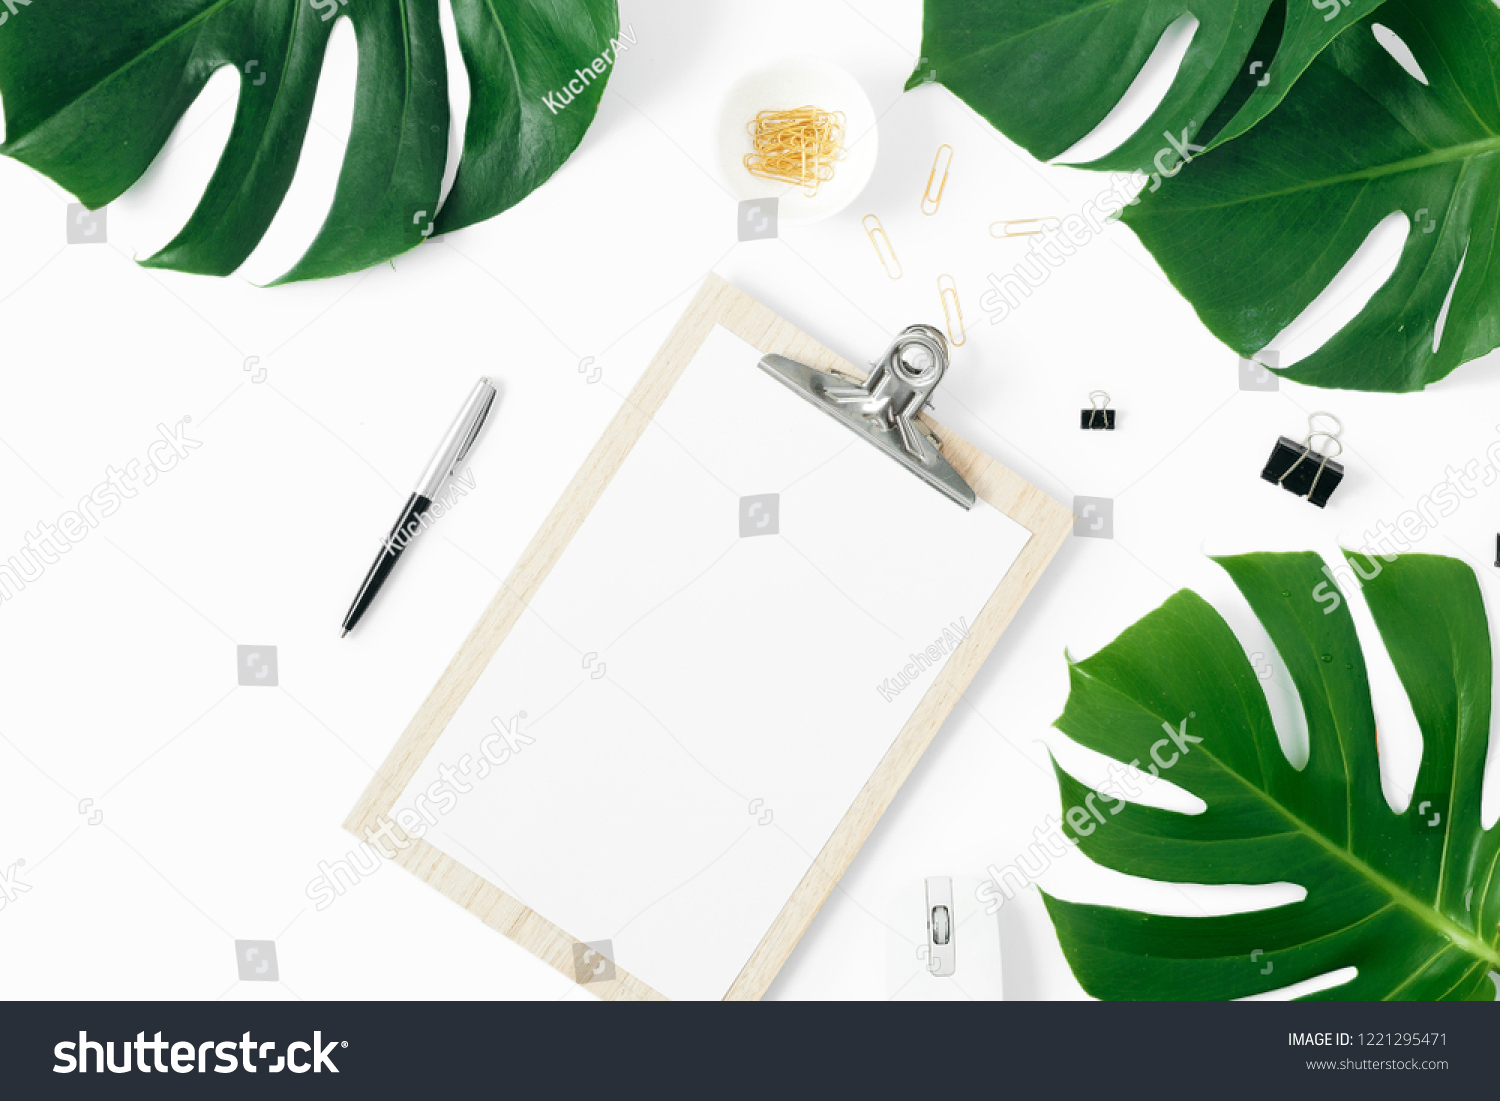 Clipboard with monstera leaves on white background flat lay, top view #1221295471